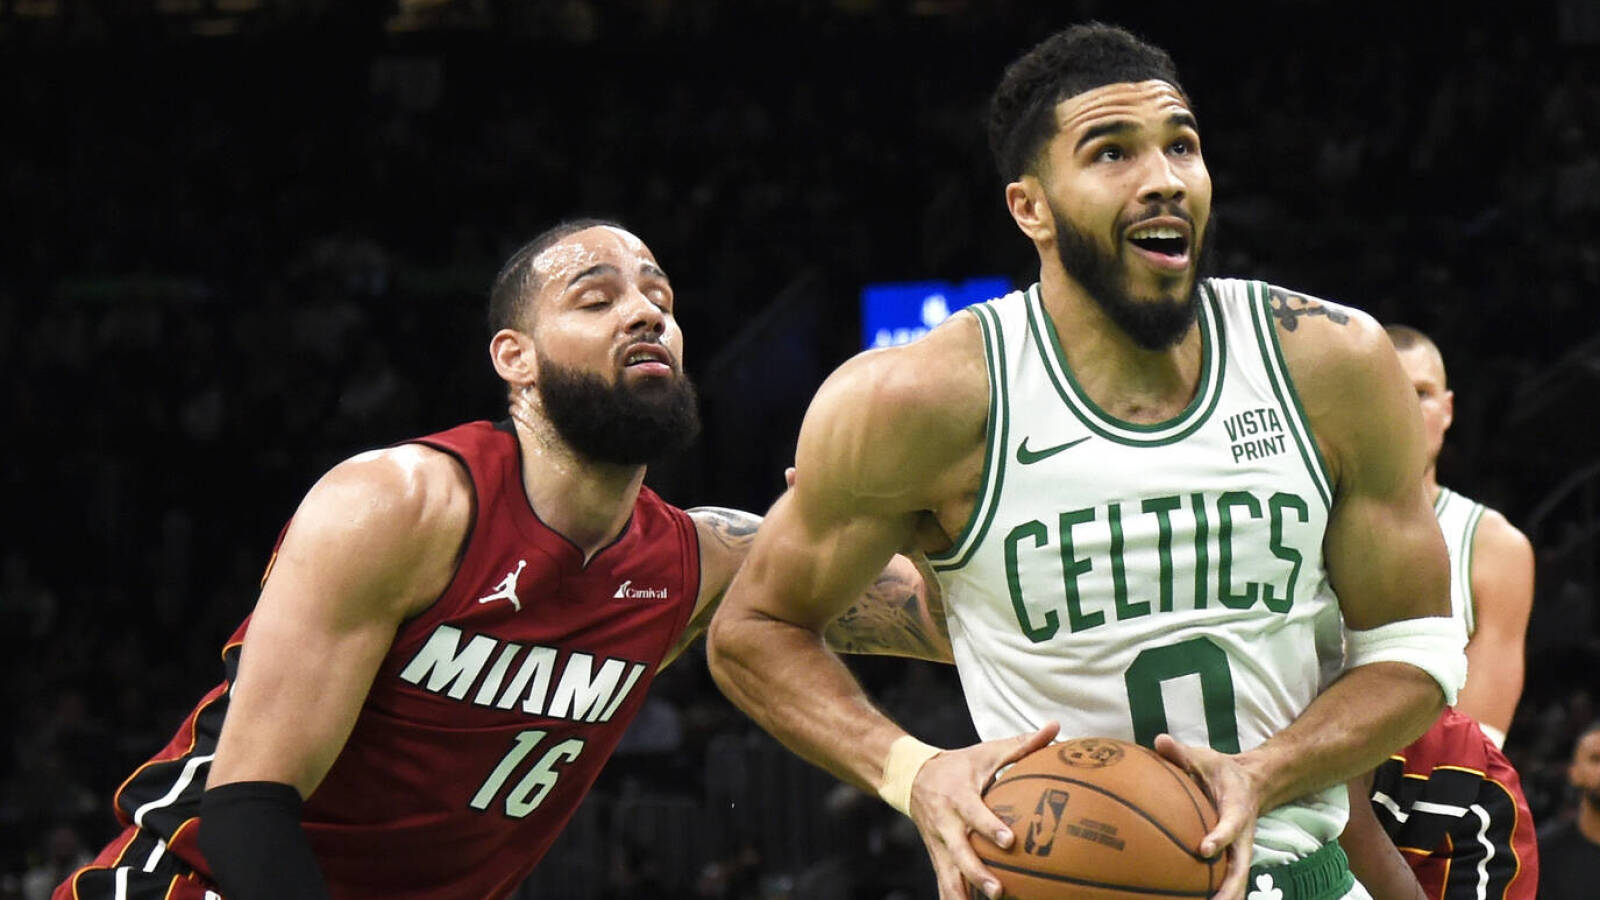 Former Celtic believes Heat intentionally tried to injure Jayson Tatum